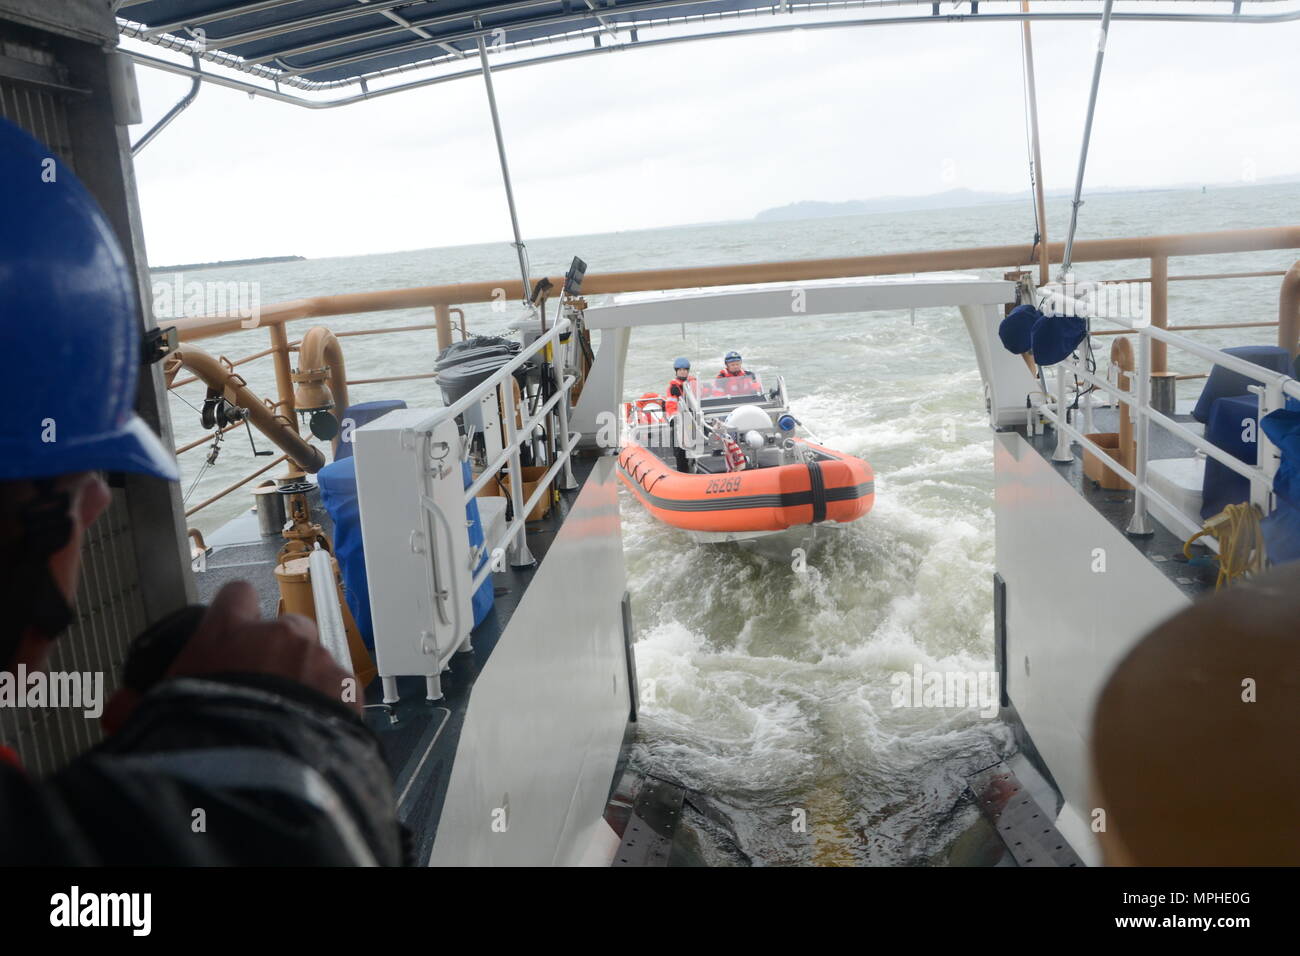 the-crew-of-the-coast-guard-cutter-john-mccormick-wpc-1121-launches-their-small-boat-from-the-stern-boat-ramp-in-preparation-for-mooring-in-astoria-oregon-march-11-2017-the-new-fast-response-cutter-has-increased-capabilities-compared-to-the-smaller-110-foot-patrol-boats-it-is-replacing-including-safer-small-boat-launch-and-recover-via-the-stern-ramp-the-john-mccormick-is-the-first-frc-on-the-west-coast-us-coast-guard-photo-by-lt-brian-dykens-MPHE0G.jpg